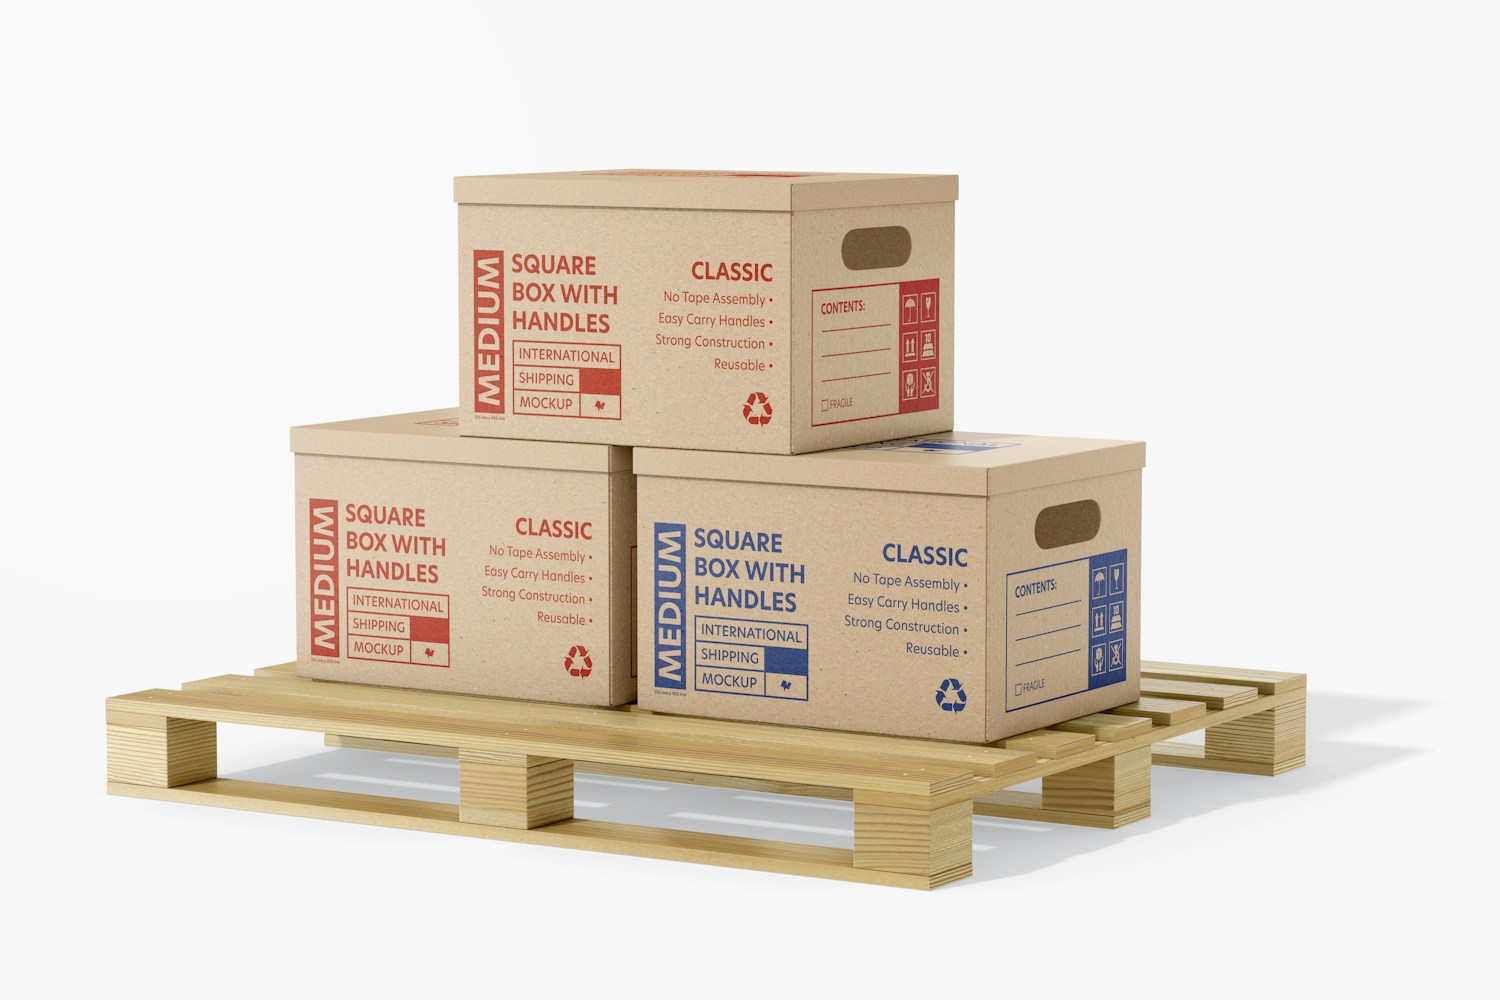 Square Boxes with Handles Mockup, on Stowage